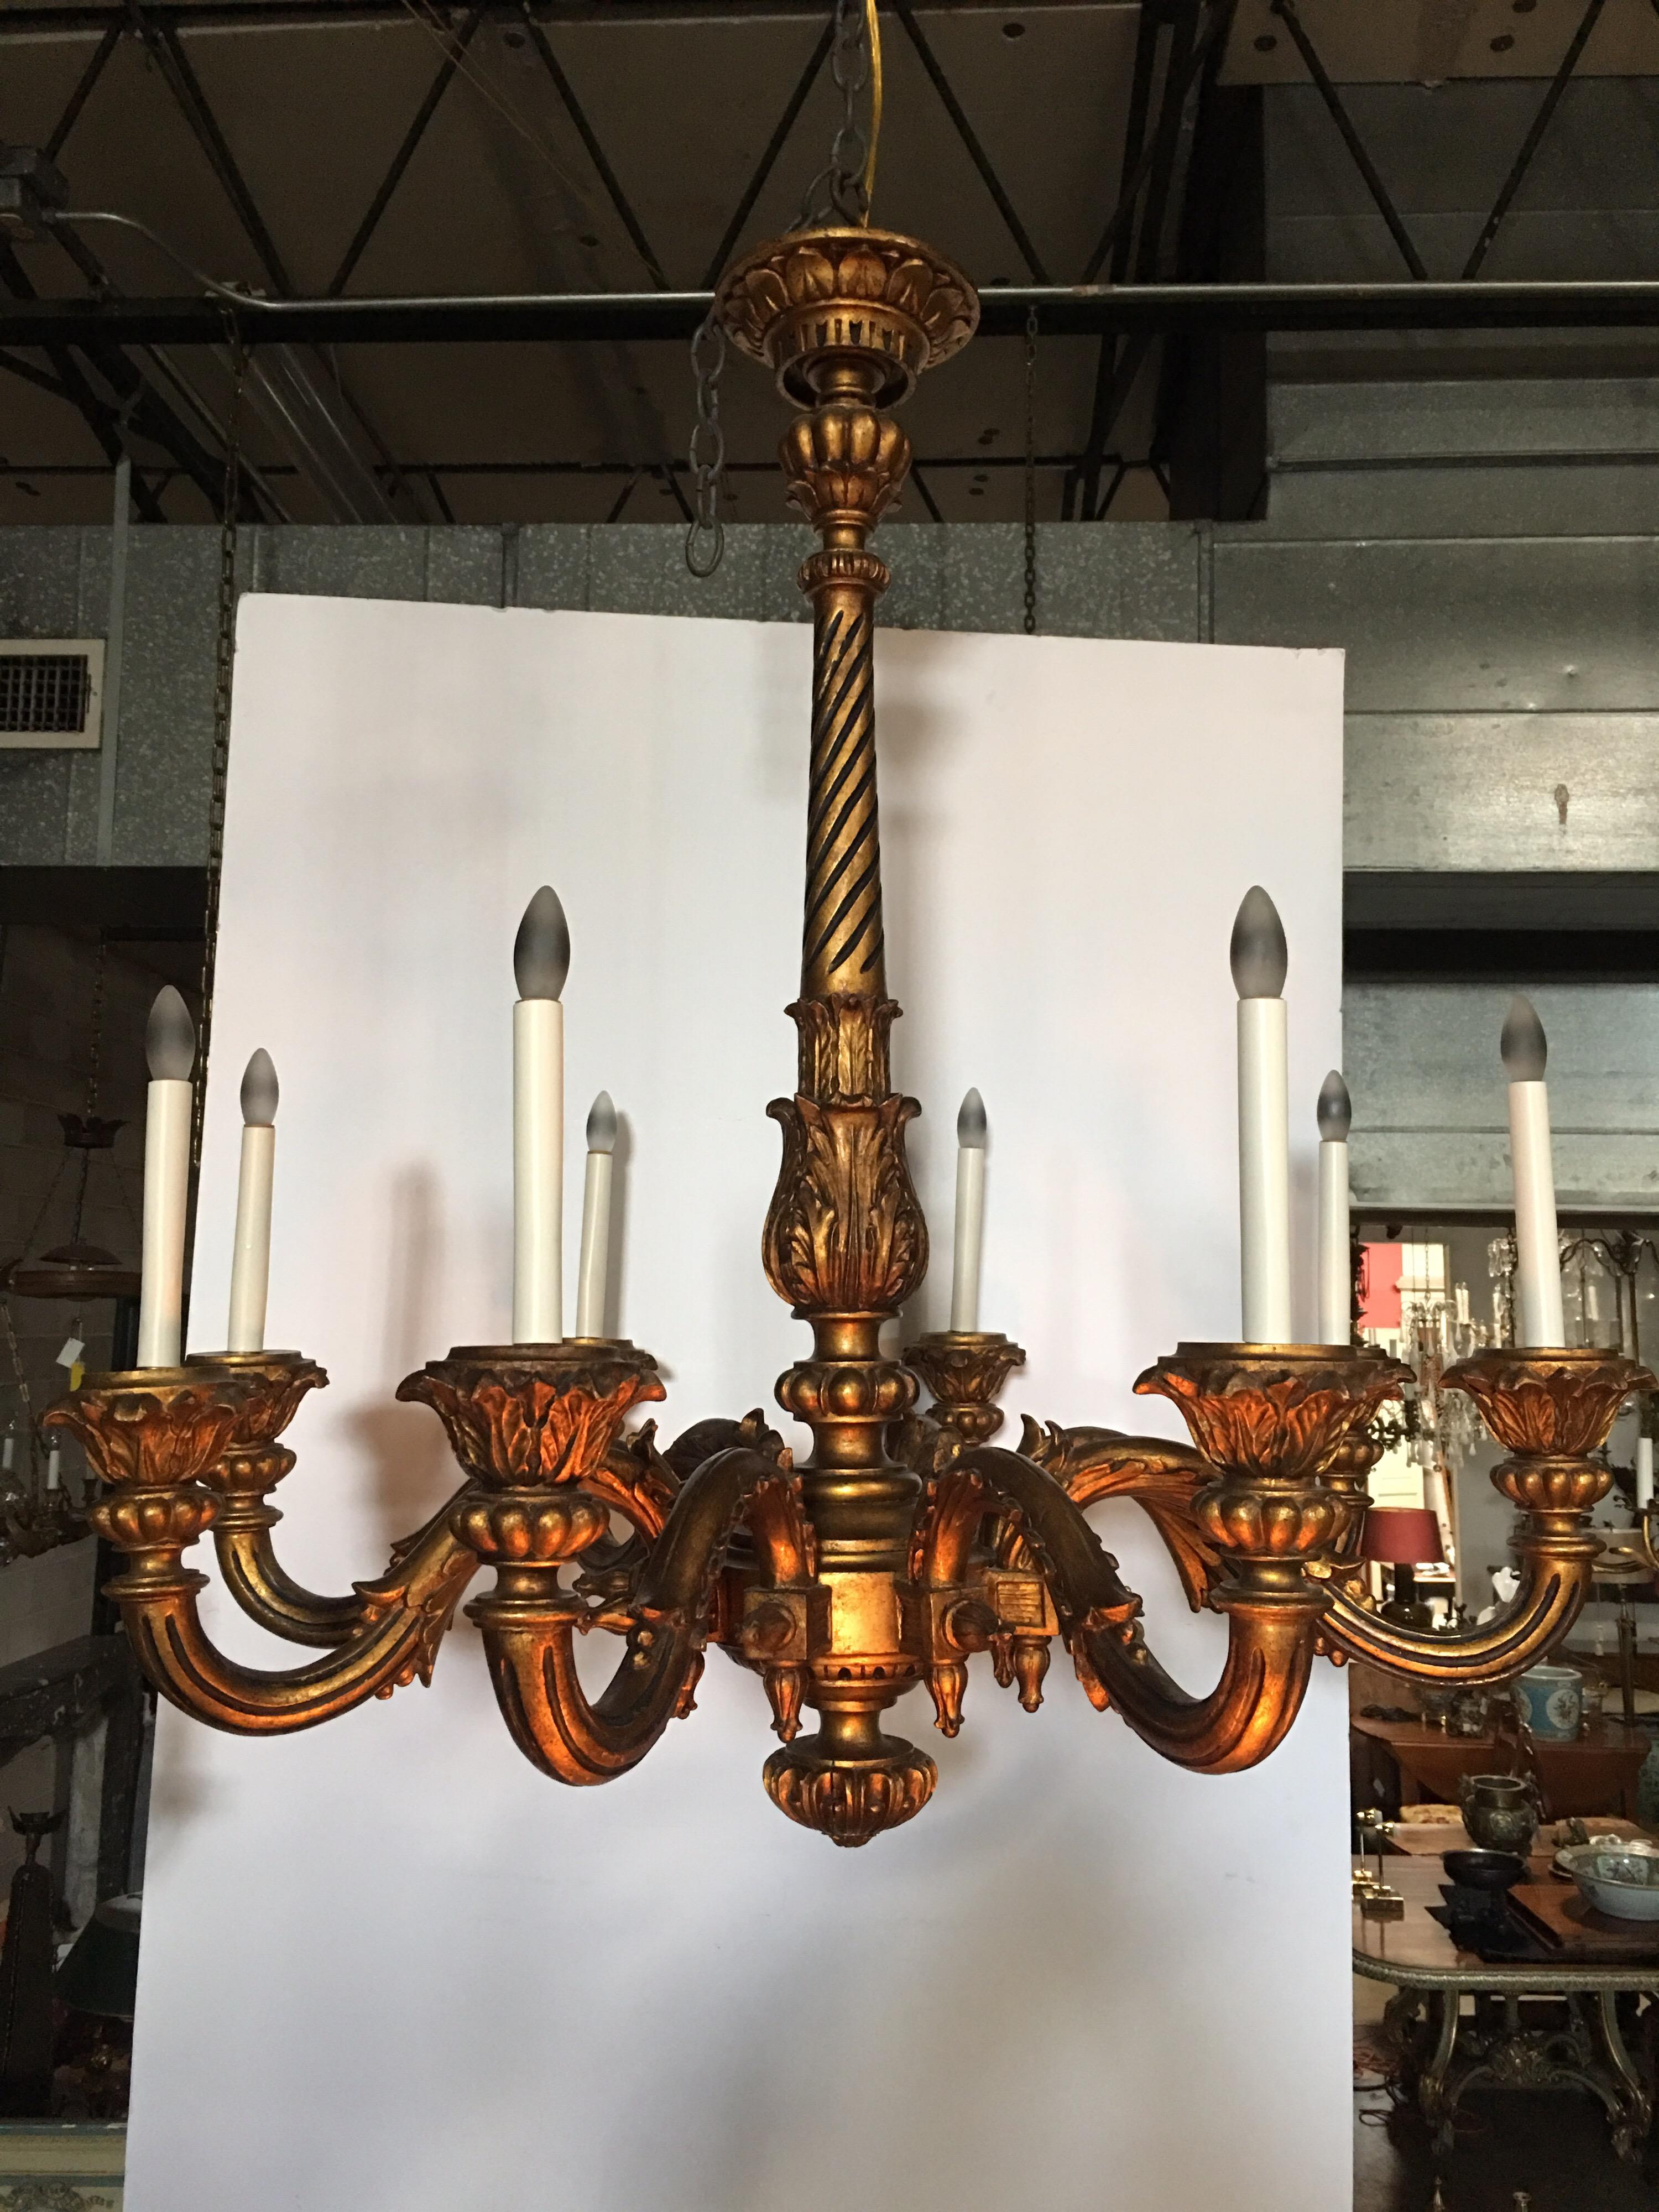 This large antique 19th century French Louis XVI style carved and giltwood chandelier features carved foliate designs, and scrolling branches that end in acanthus leaf bobeches. . The piece has a rich patina throughout.